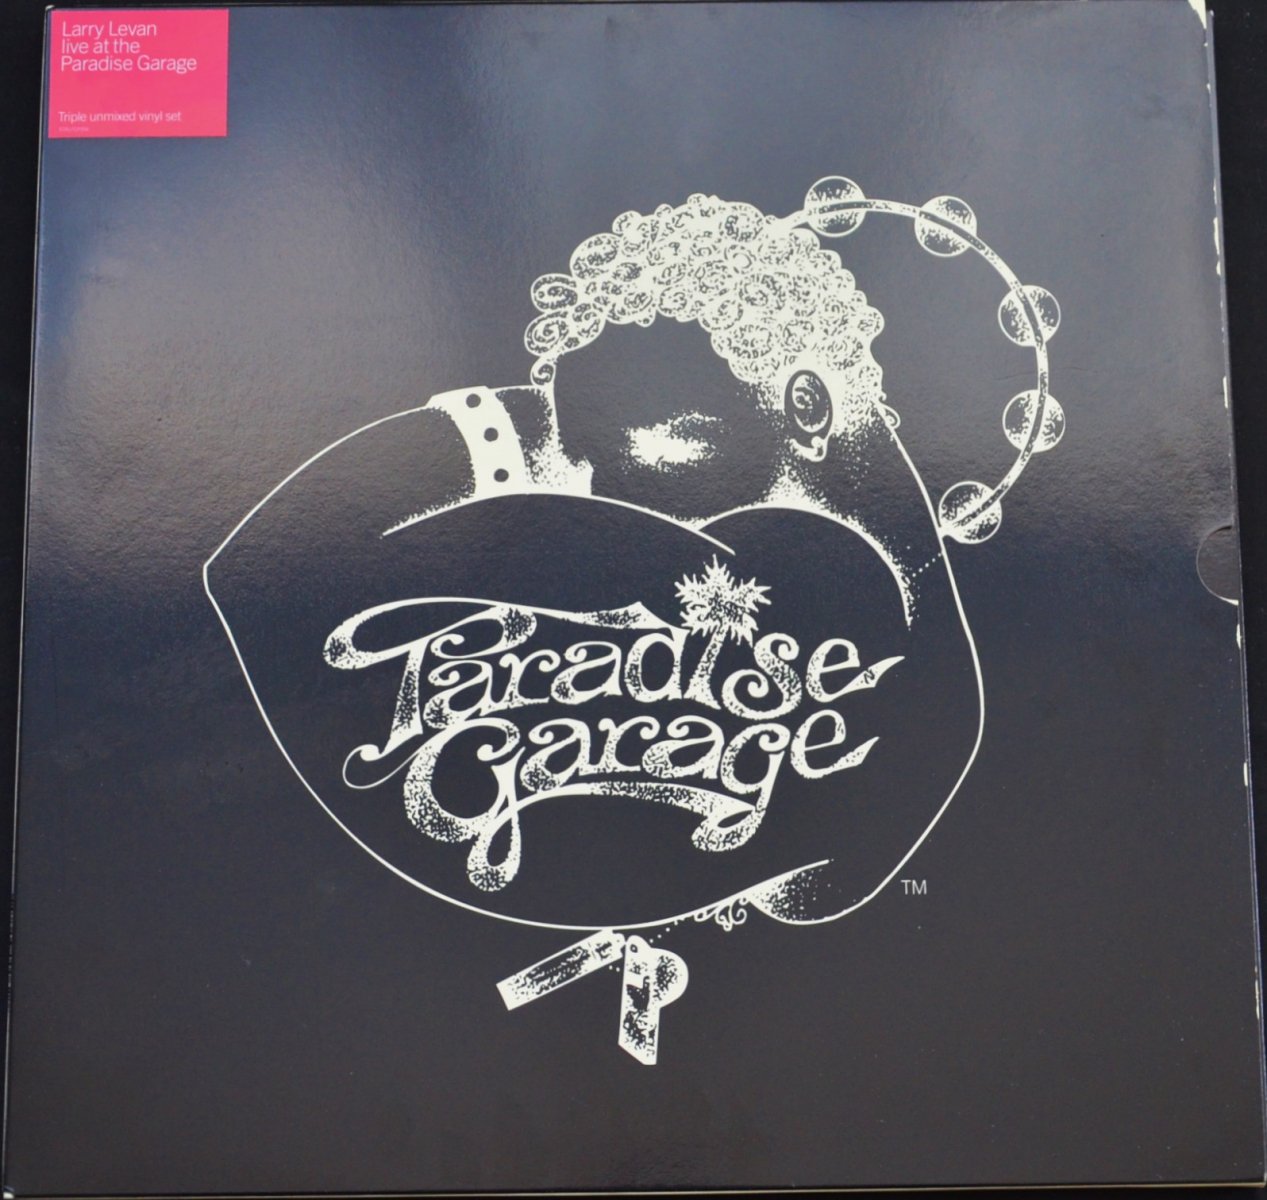 Larry Levan『Live at the paradise Garage』